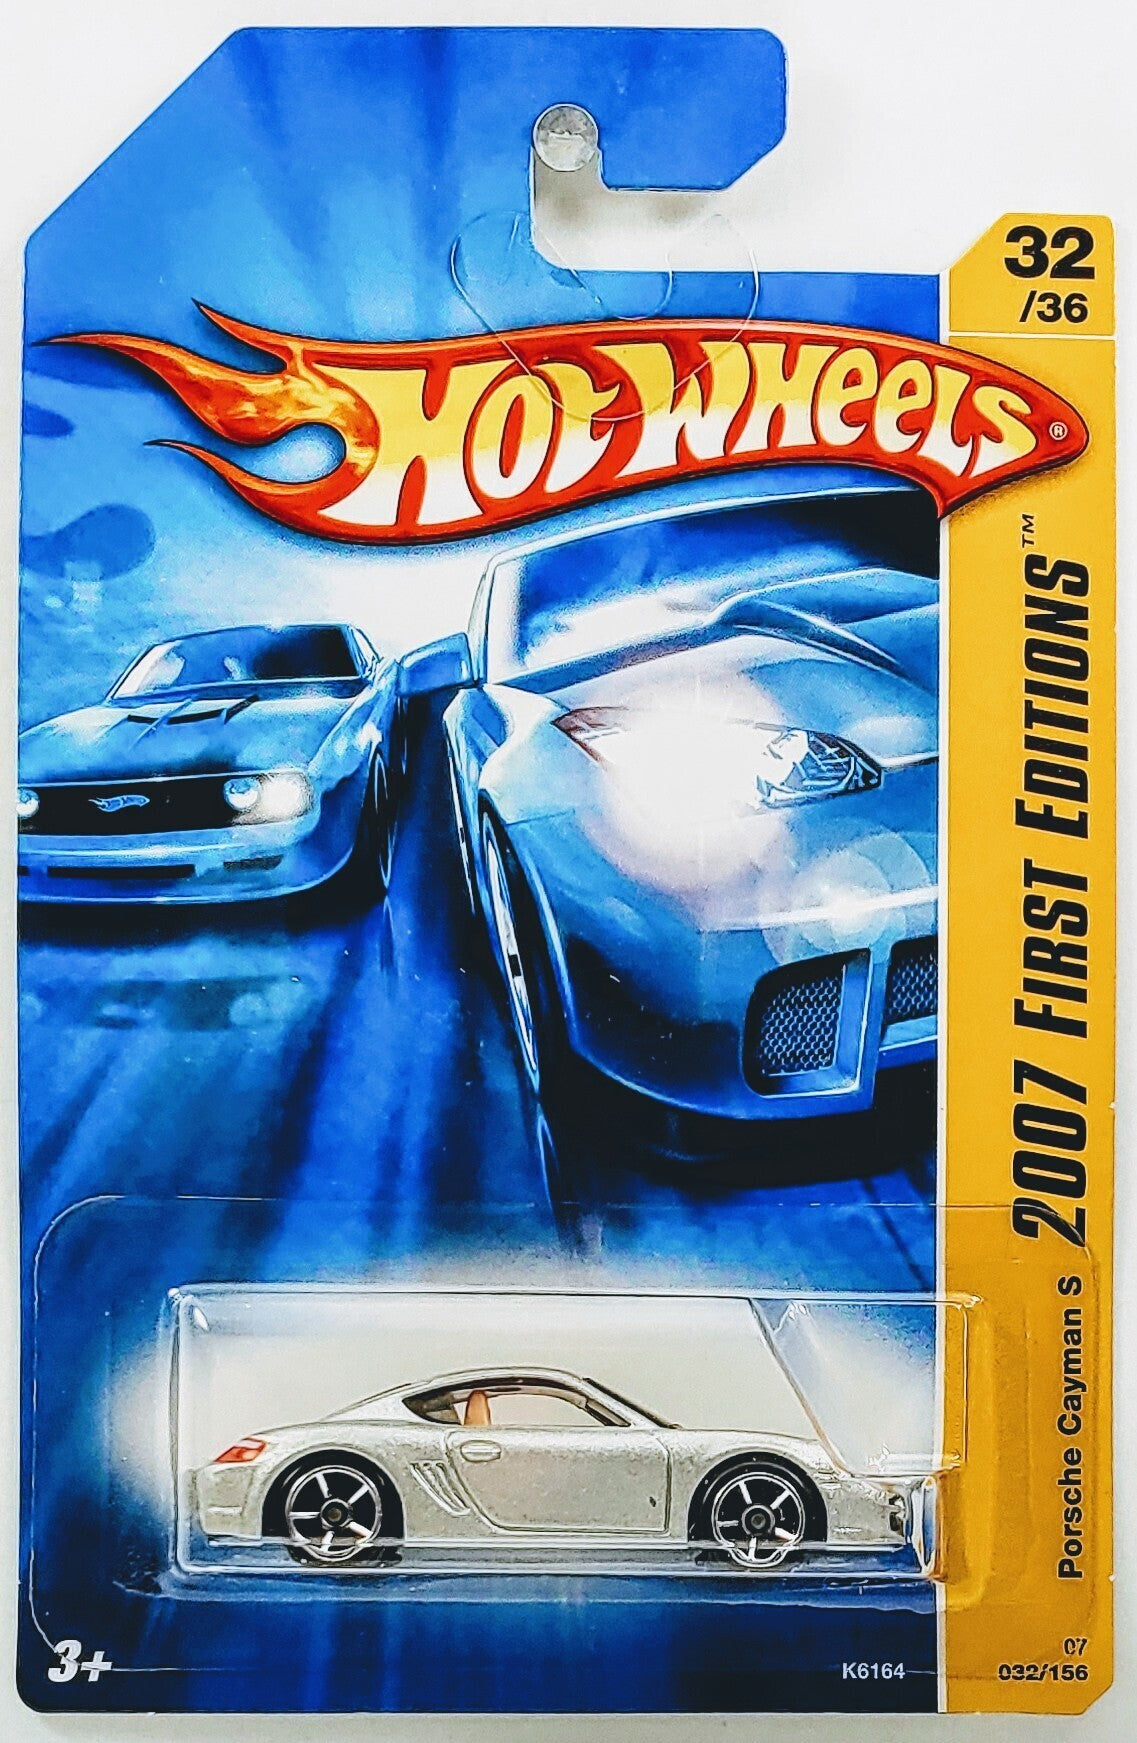 Hot Wheels 2007 - Collectors # 032/156 - First Editions 32/36 - Porsche Cayman S - Silver - OH5SP Wheels - IC